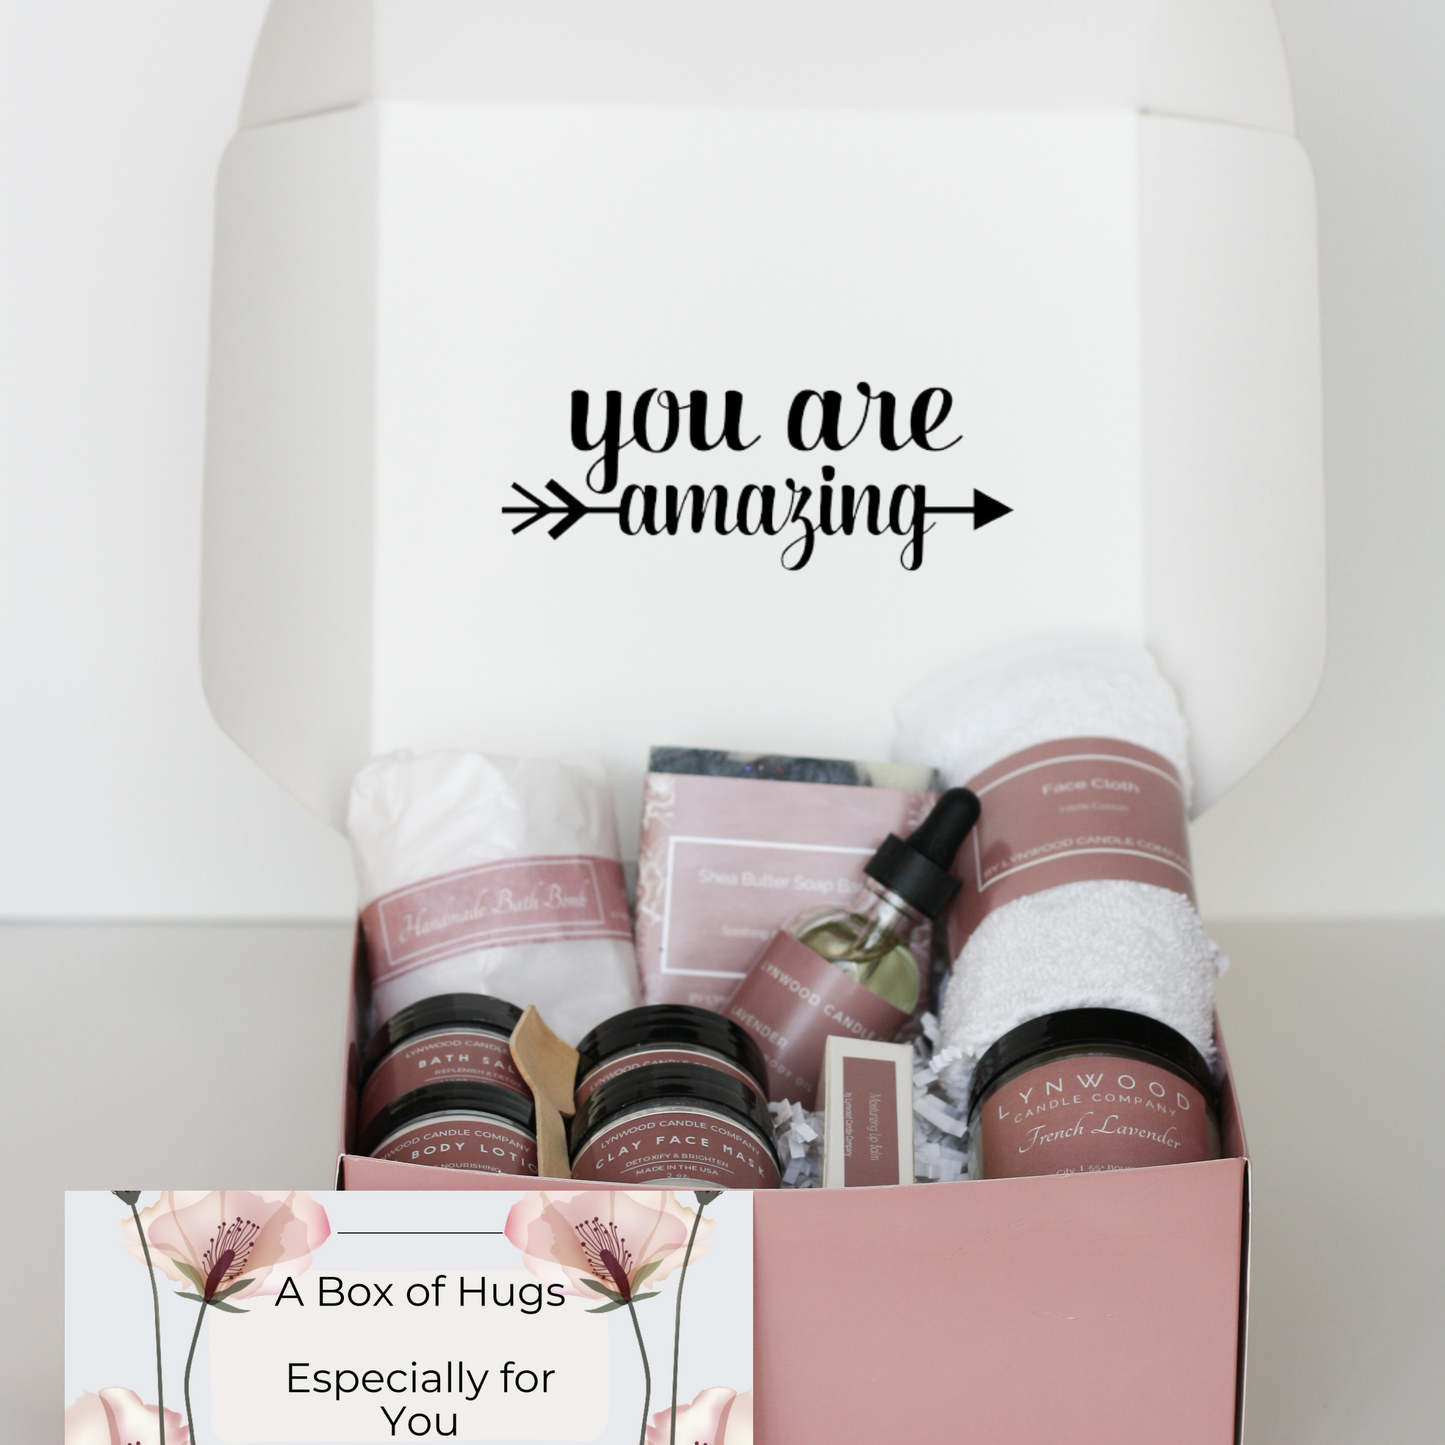 You Are Amazing! Self-Care Gift Box